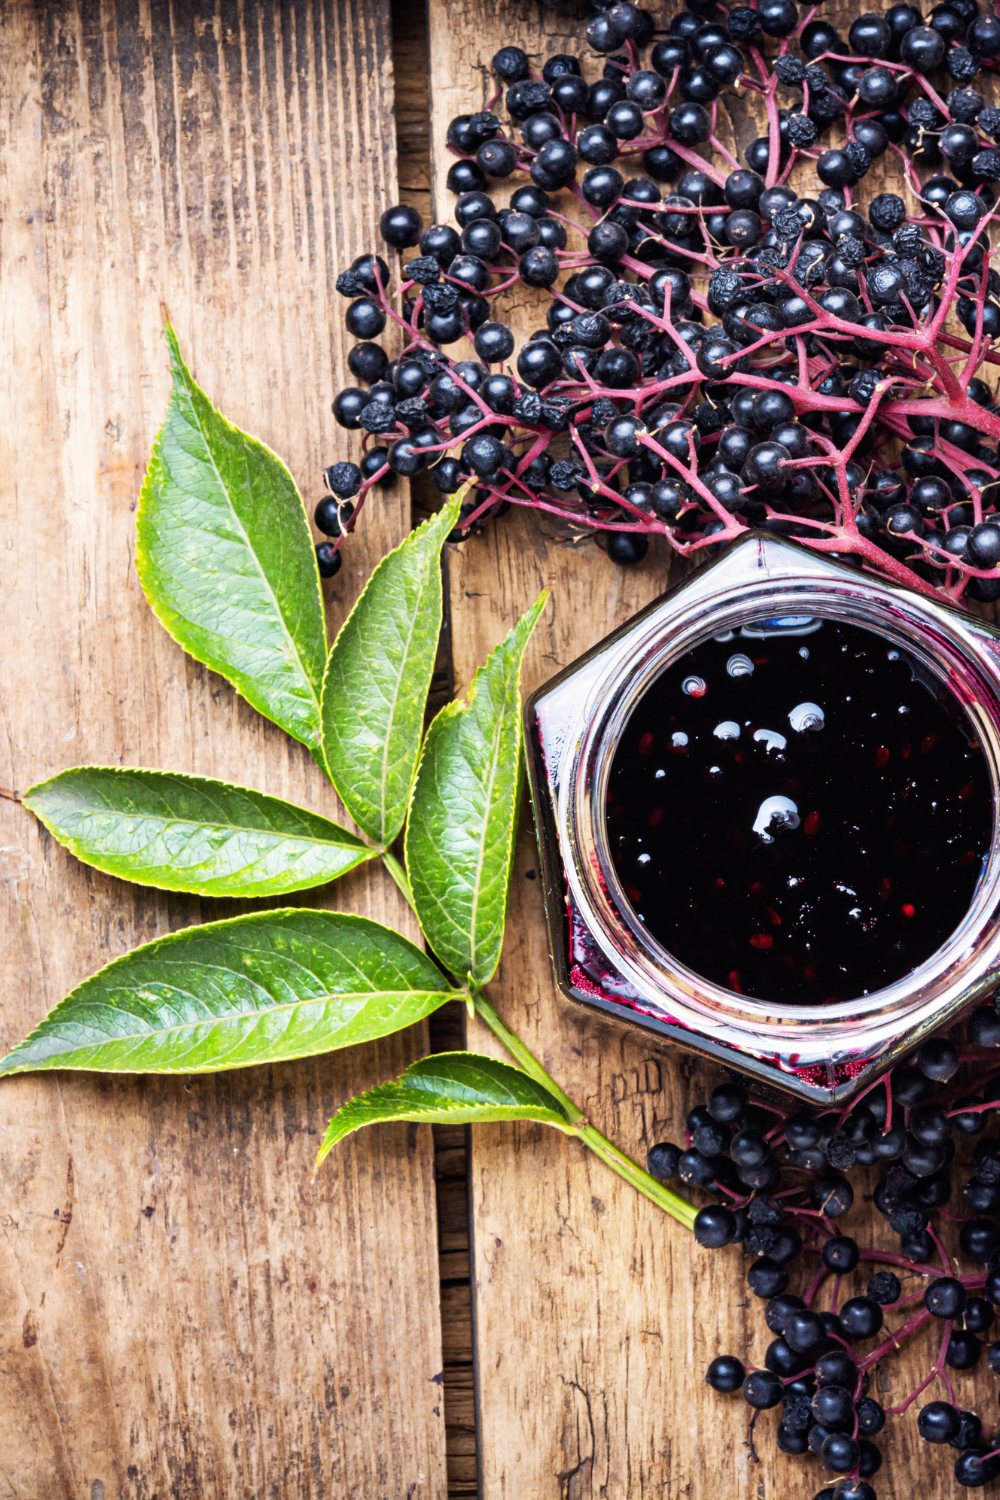 10 Ways To Add Elderberry Syrup to Your Meals